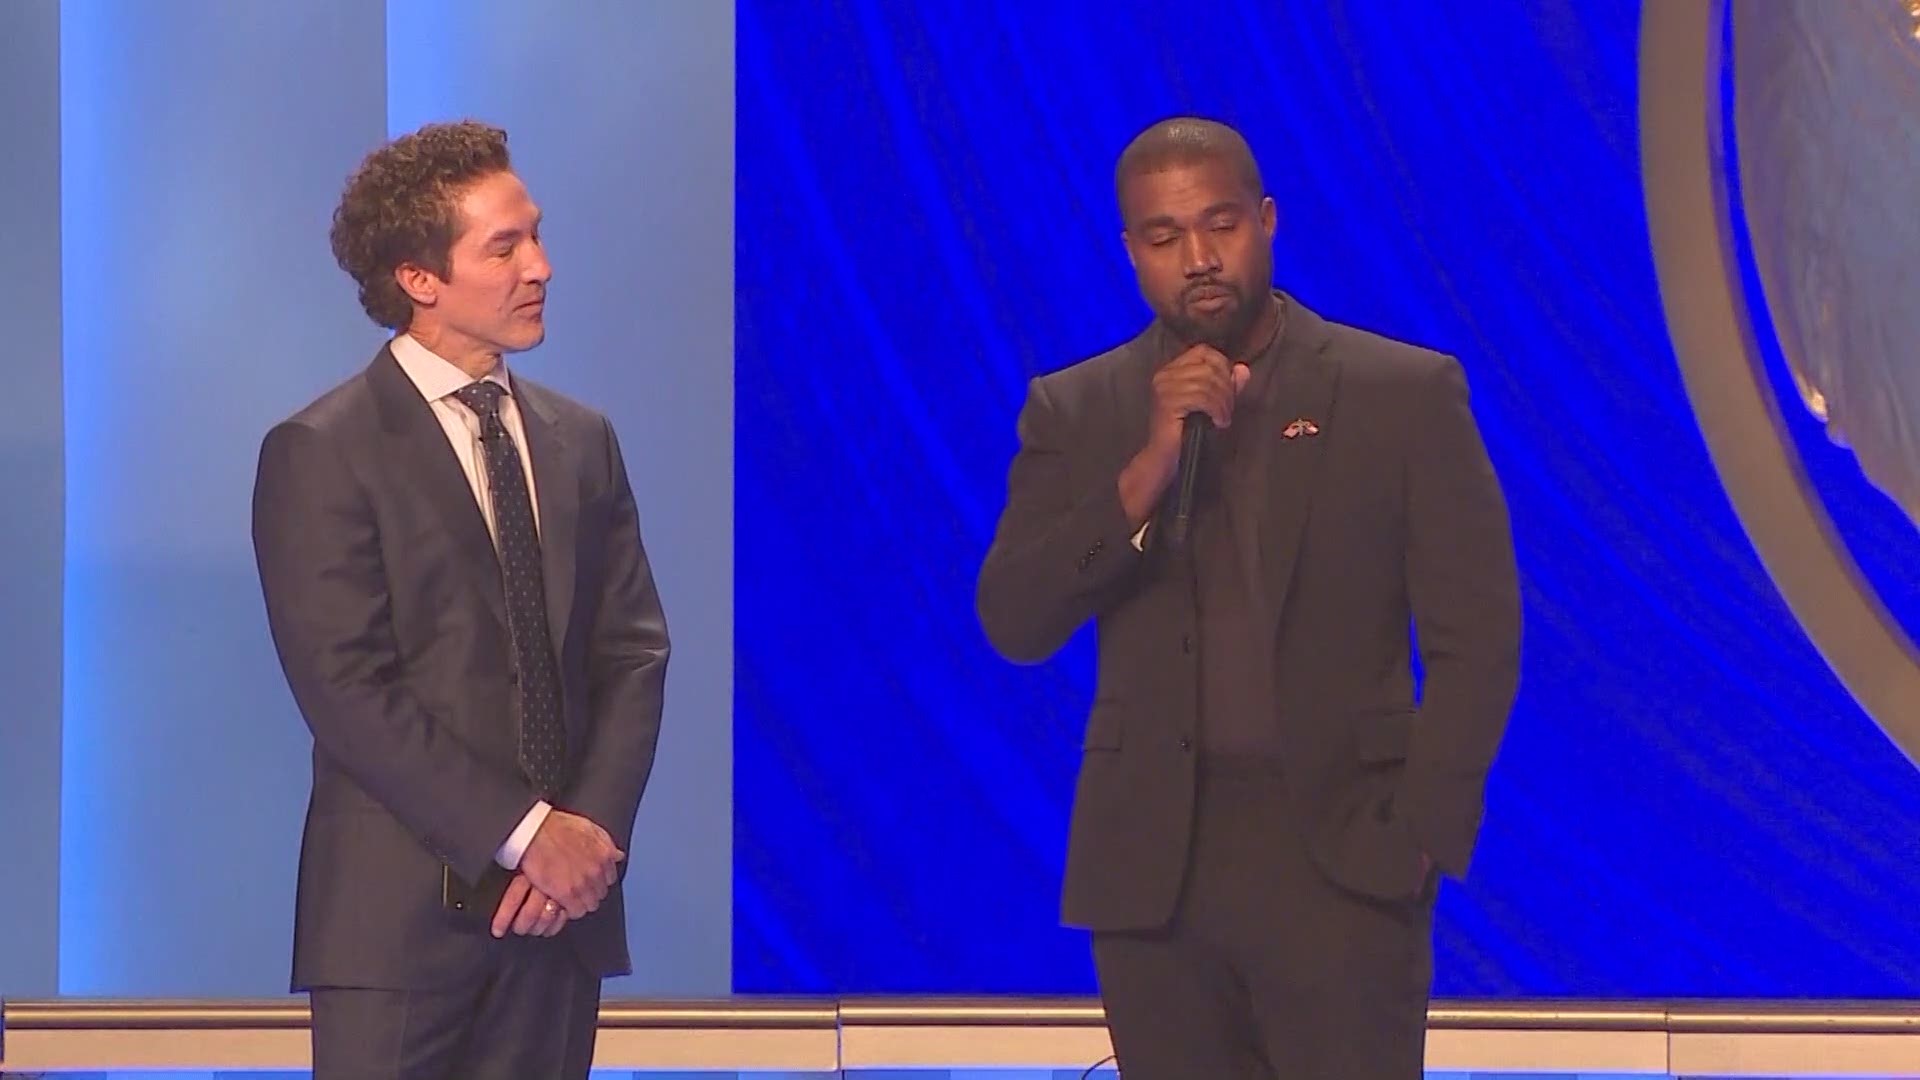 Kanye West attended the 11 a.m. service at Lakewood Church on Nov. 17. He took the stage with Pastor Joel Osteen to talk about his spiritual transformation.